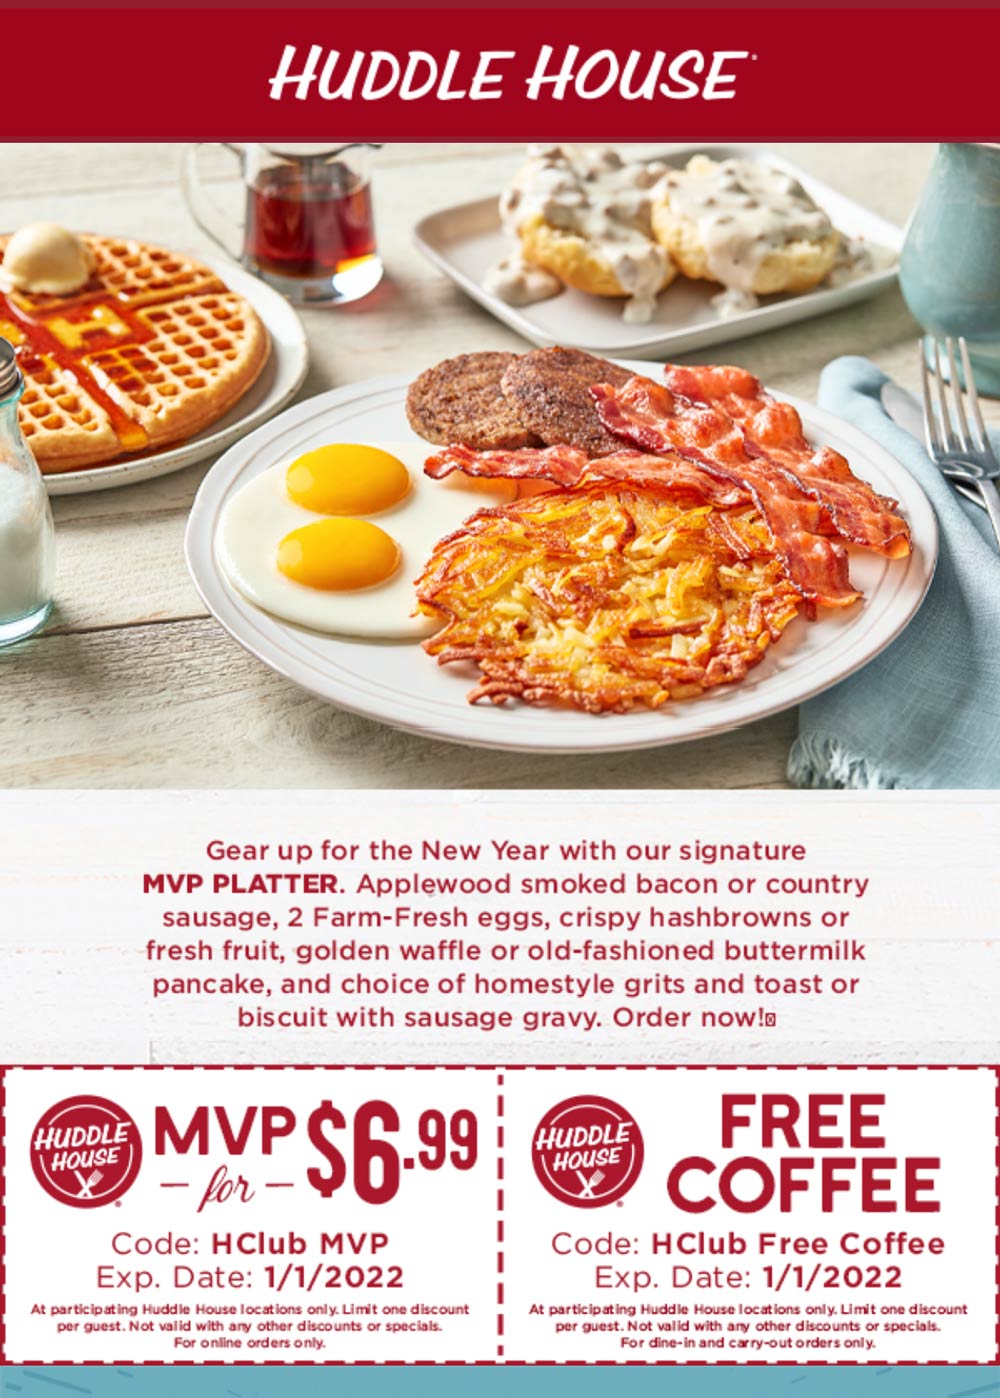 Huddle House restaurants Coupon  Bacon + 2 eggs + hashbrowns + waffle + biscuit & gravy + coffee = $7 at Huddle House #huddlehouse 